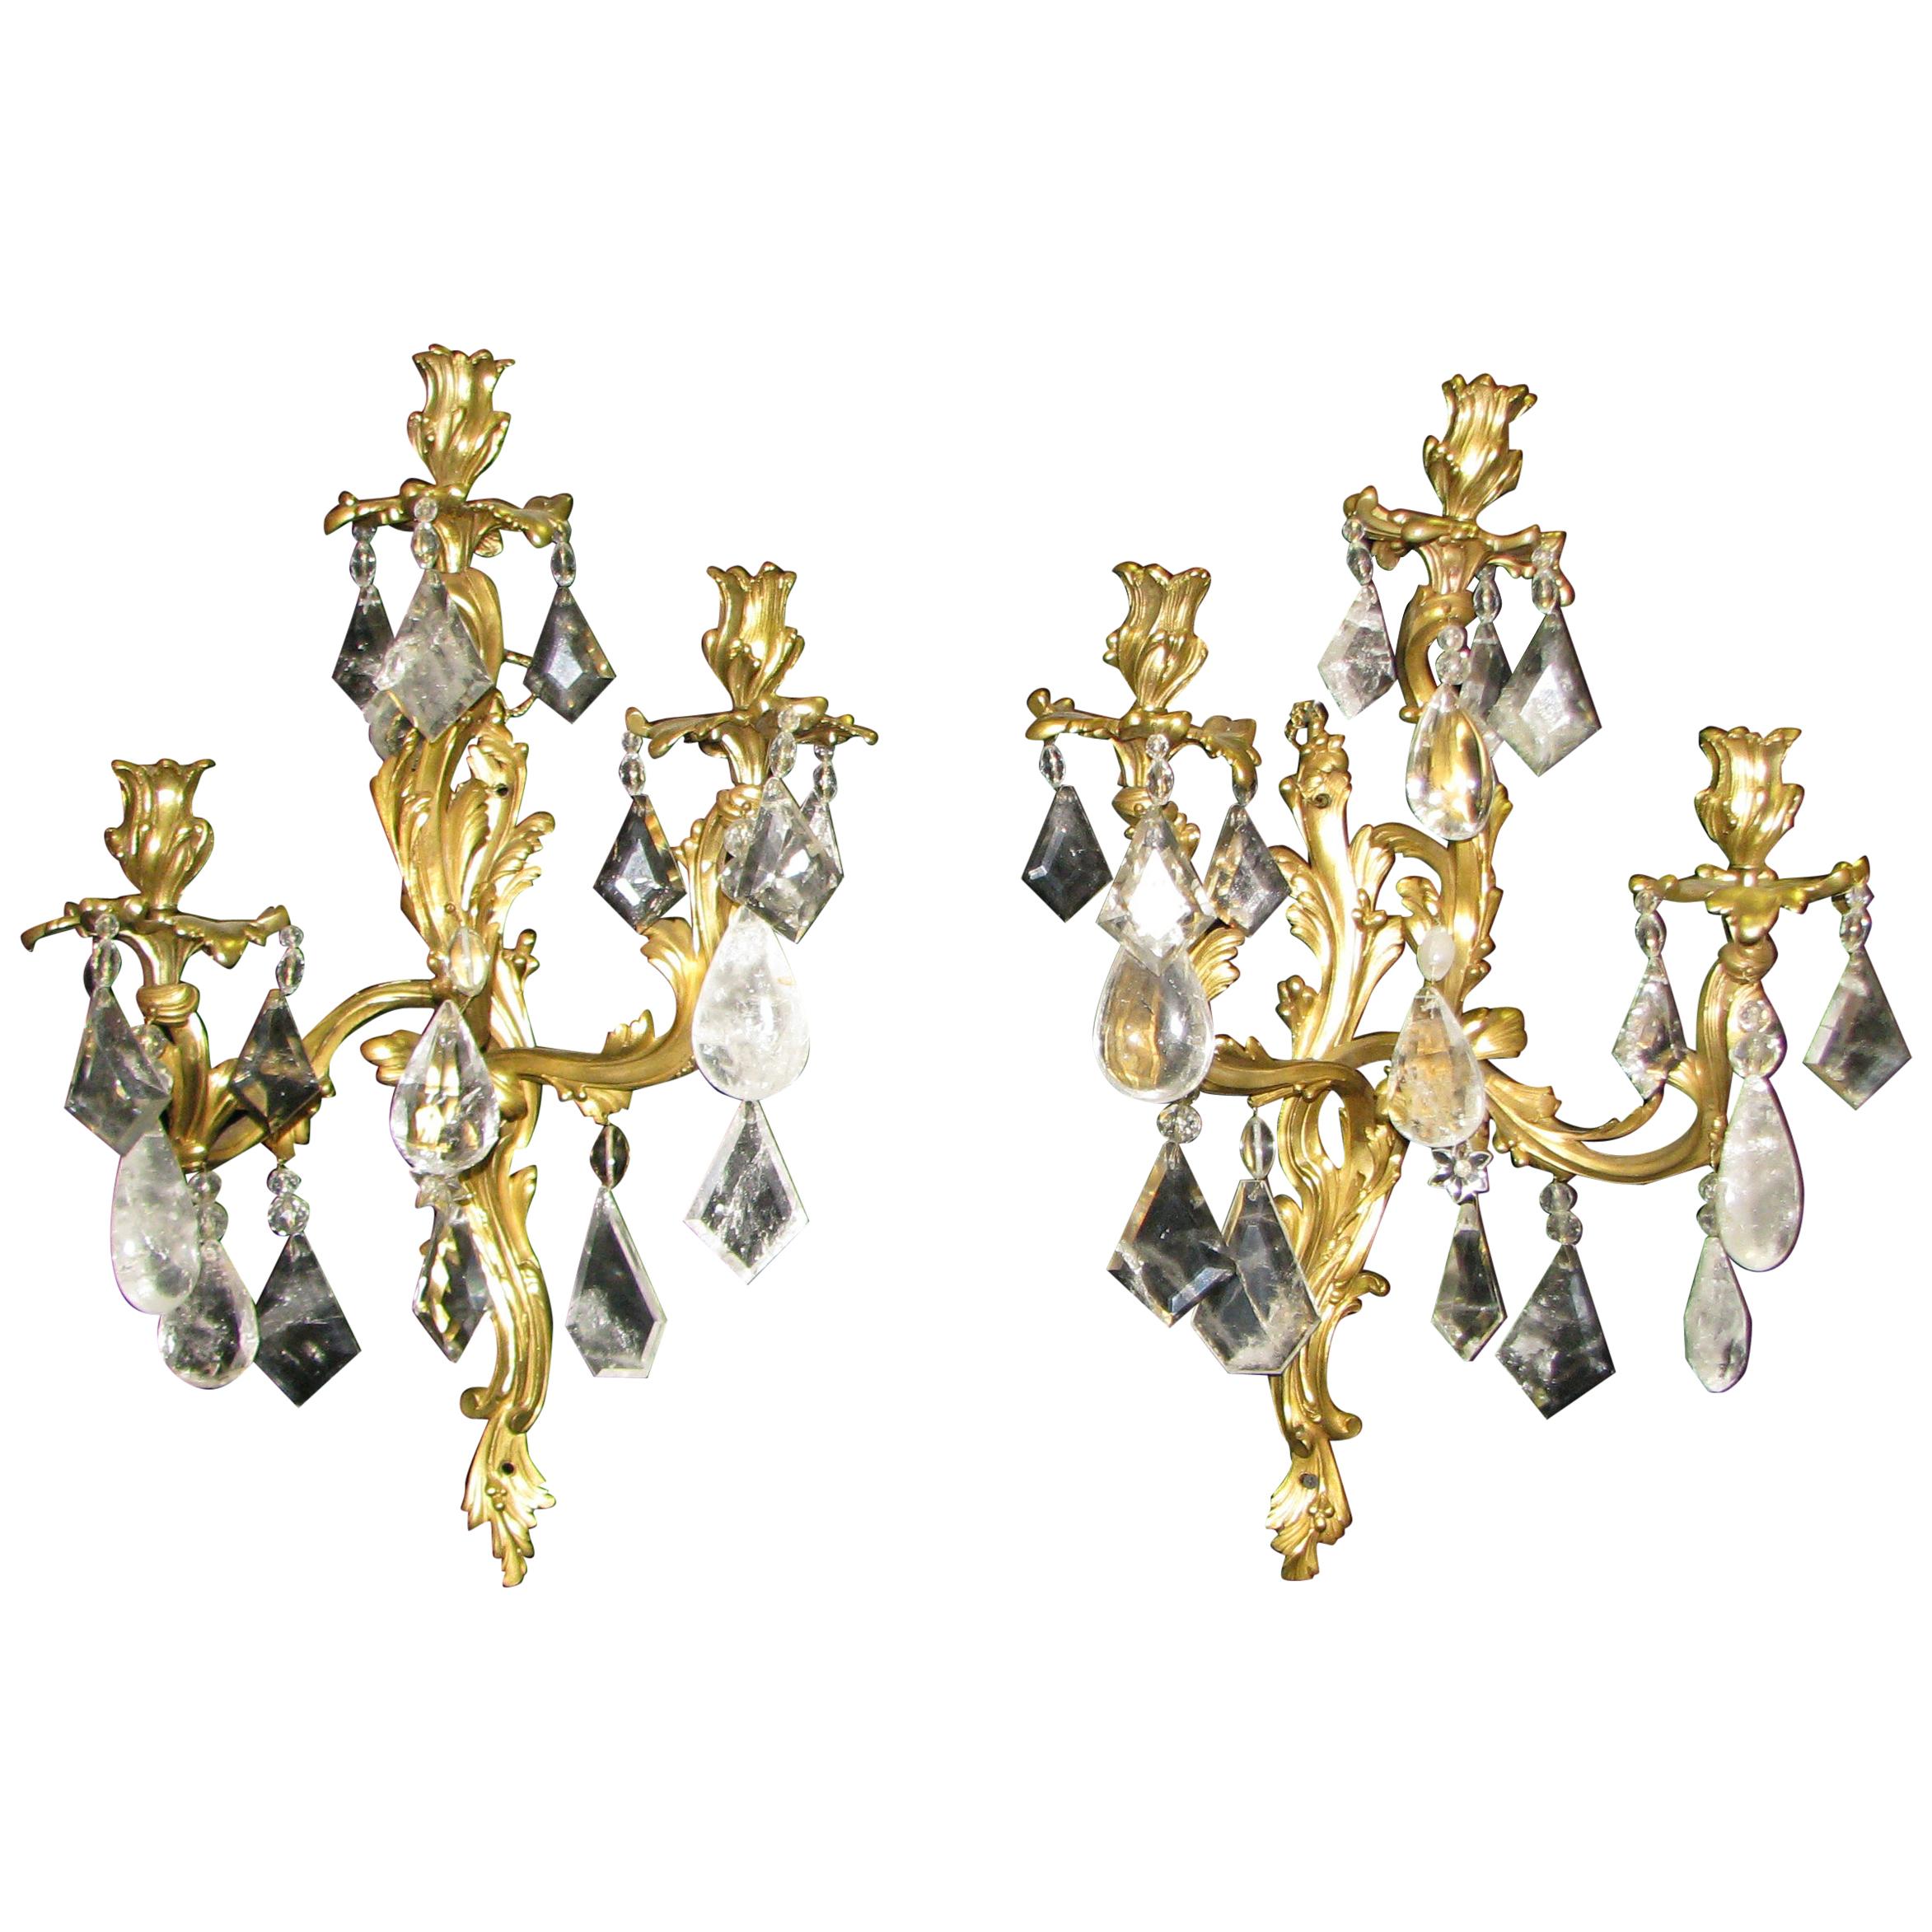 Pair of Rock Crystal and Ormolu Sconces, 19th Century